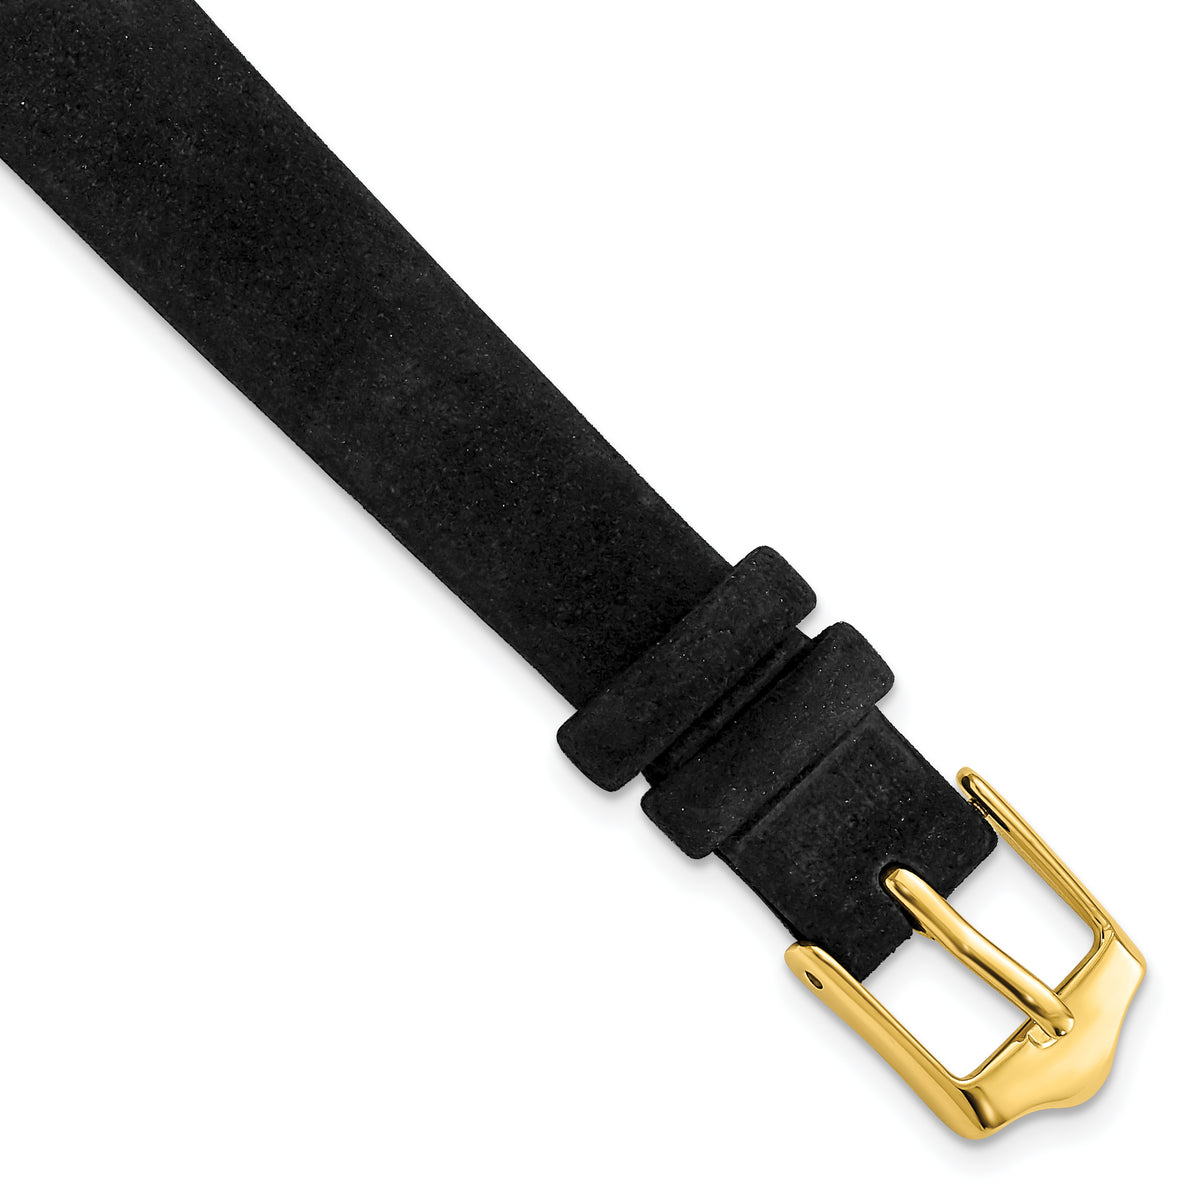 DeBeer 12mm Black Suede Flat Leather with Gold-tone Buckle 6.75 inch Watch Band